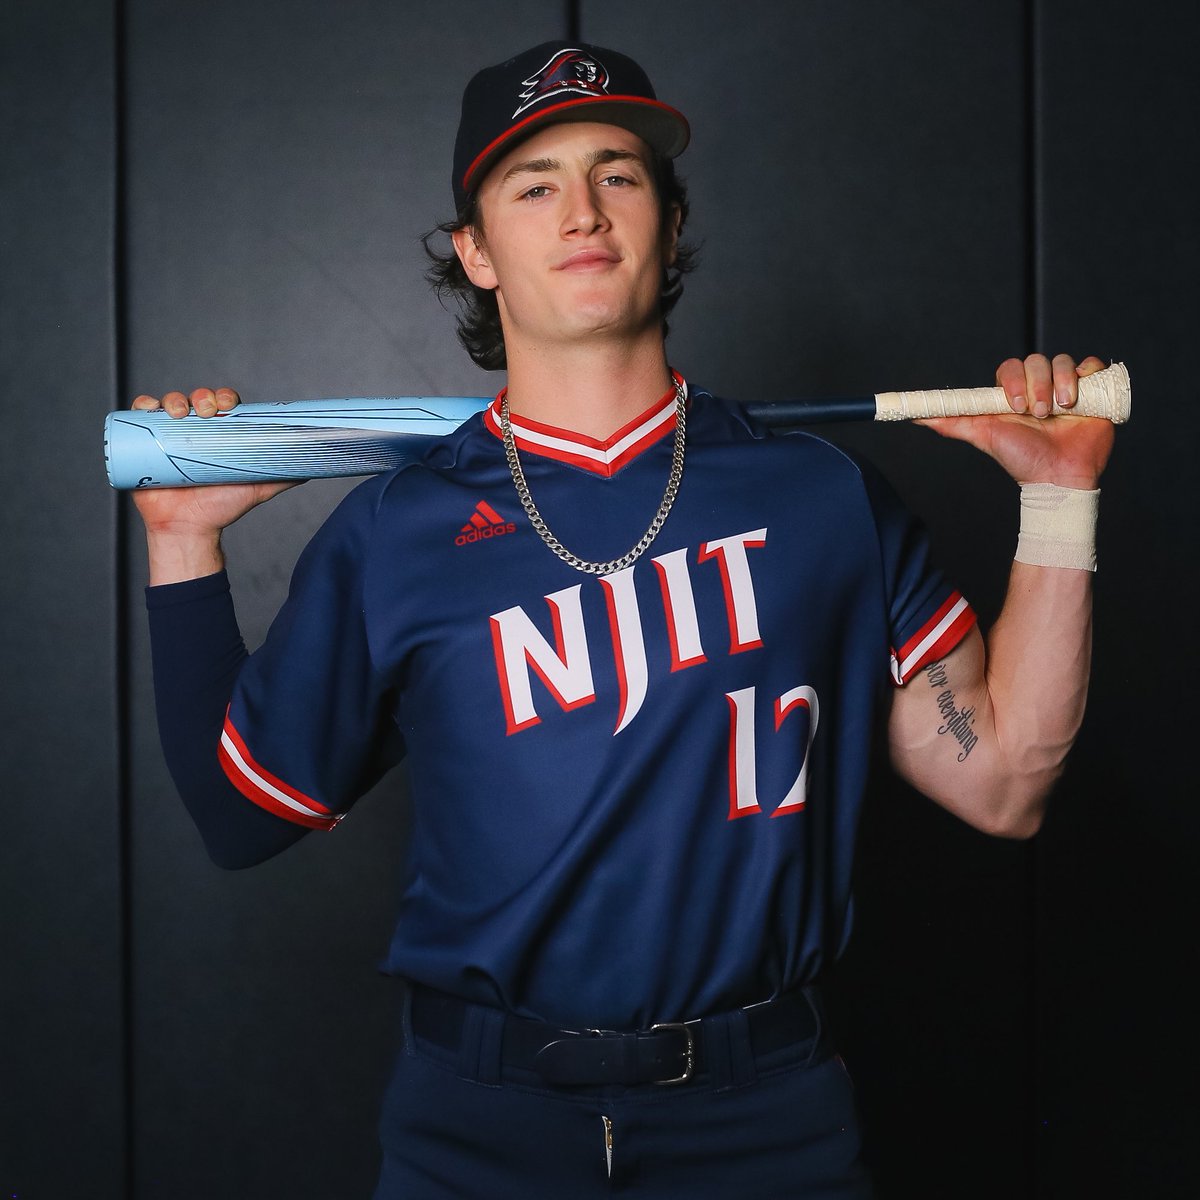 𝐇𝐈𝐆𝐇𝐋𝐀𝐍𝐃𝐄𝐑𝐒 𝐈𝐍 𝐅𝐑𝐎𝐍𝐓… RBIs from Cade Ladehoff and Cole Campbell give NJIT a 2-0 lead in the first!